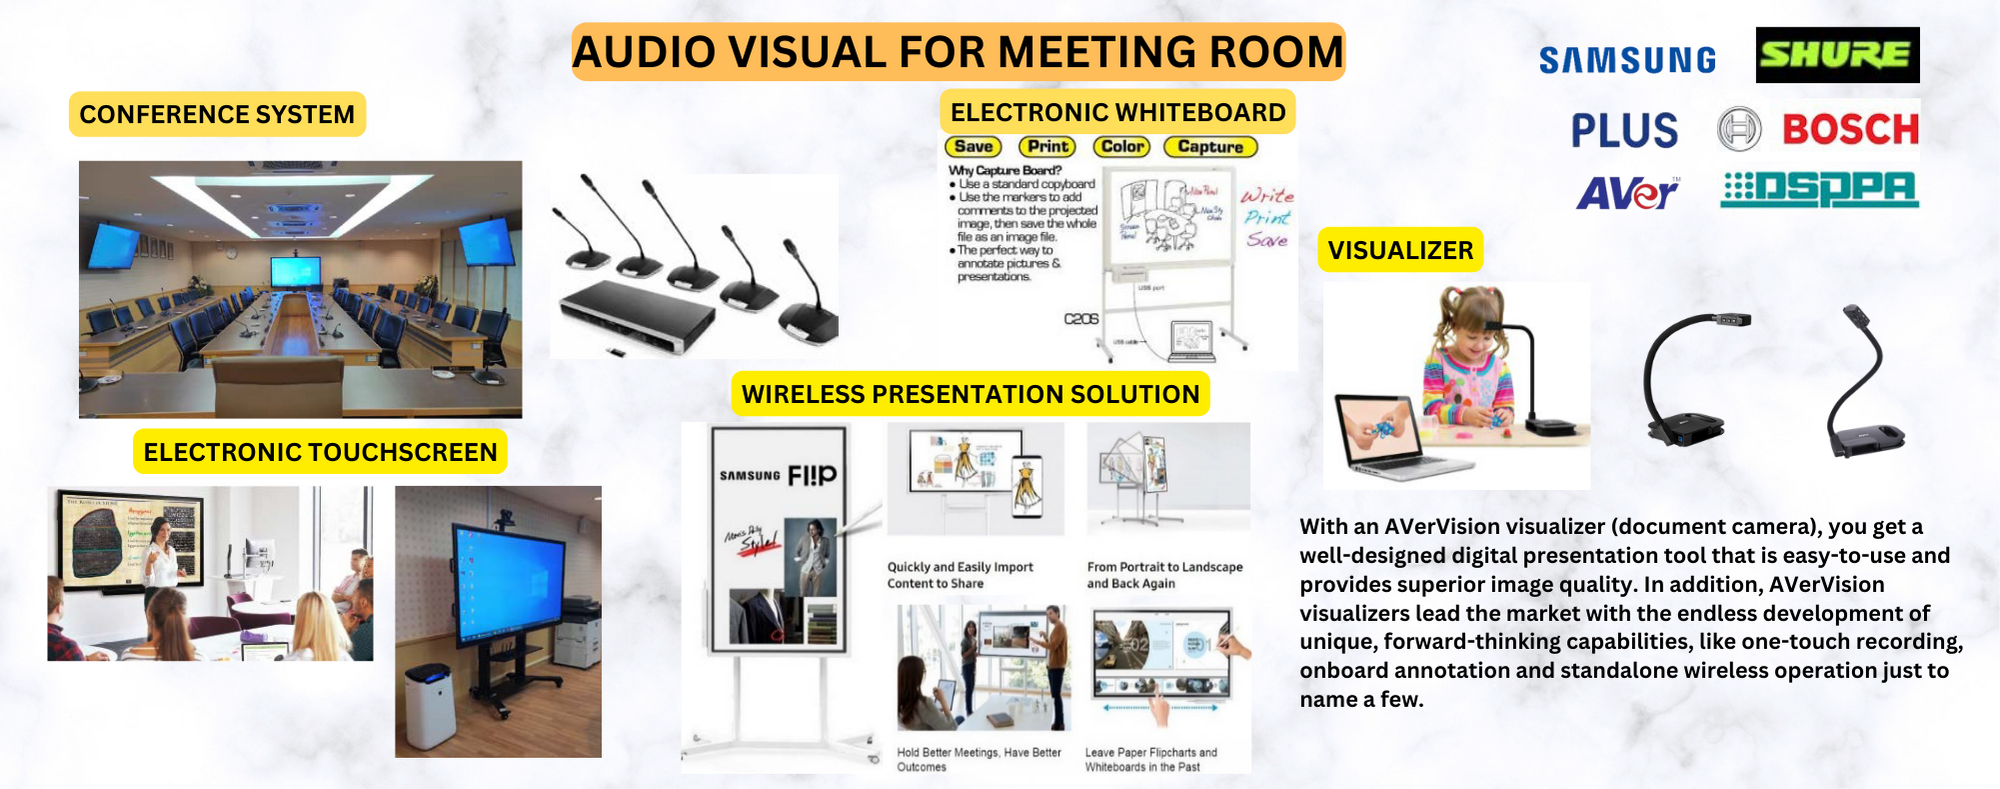 AUDIO VISUAL FOR MEETING ROOM